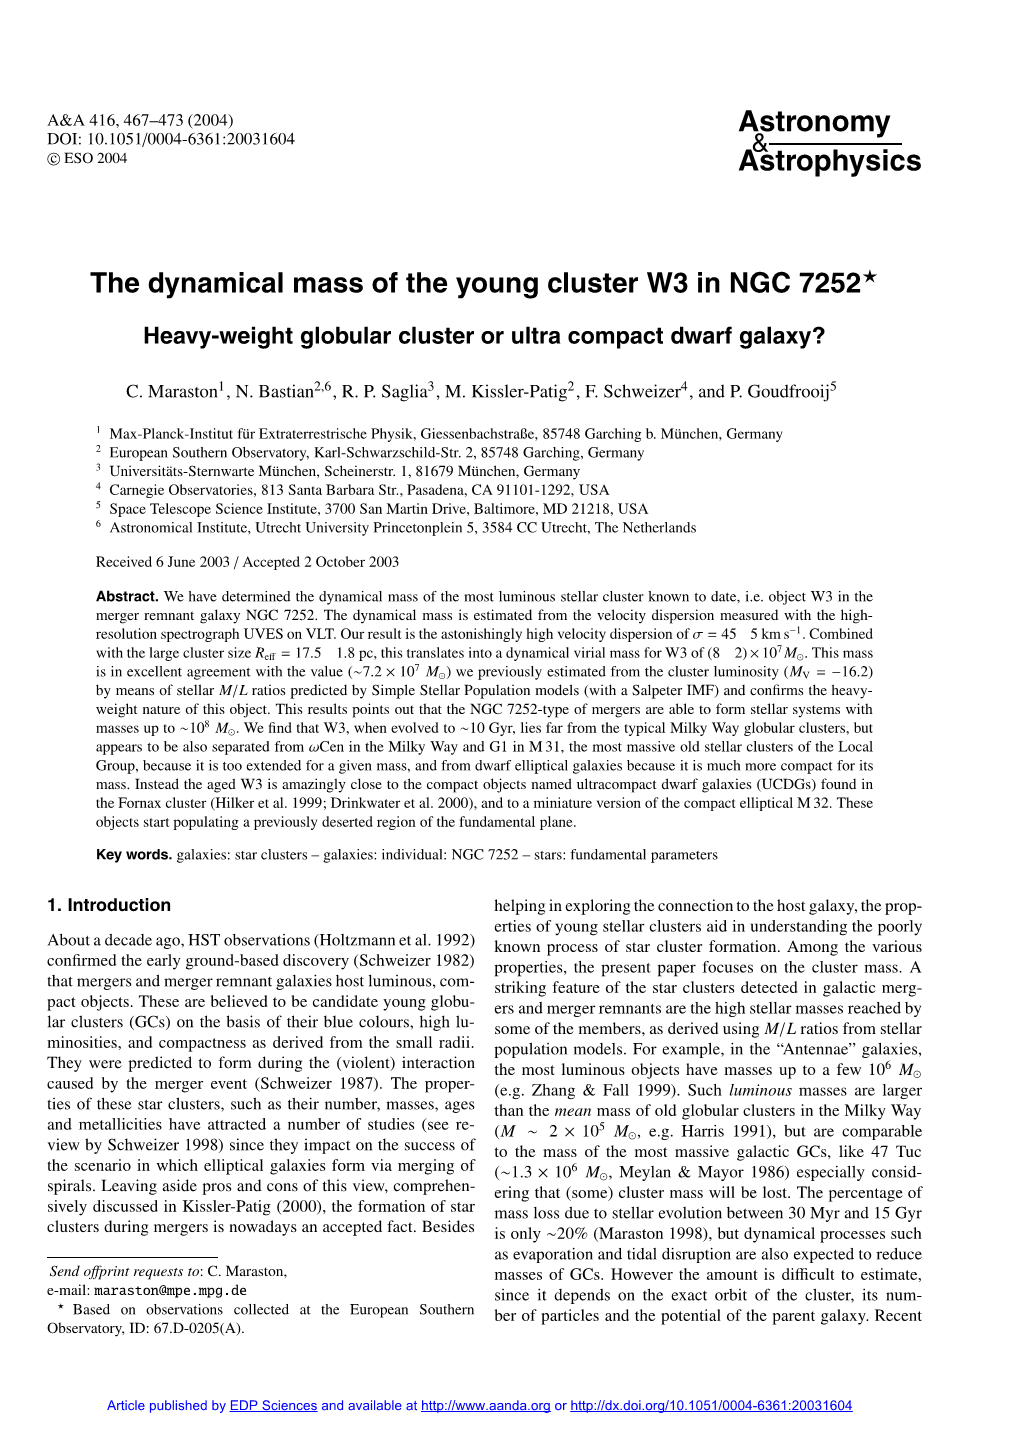 The Dynamical Mass of the Young Cluster W3 in NGC 7252